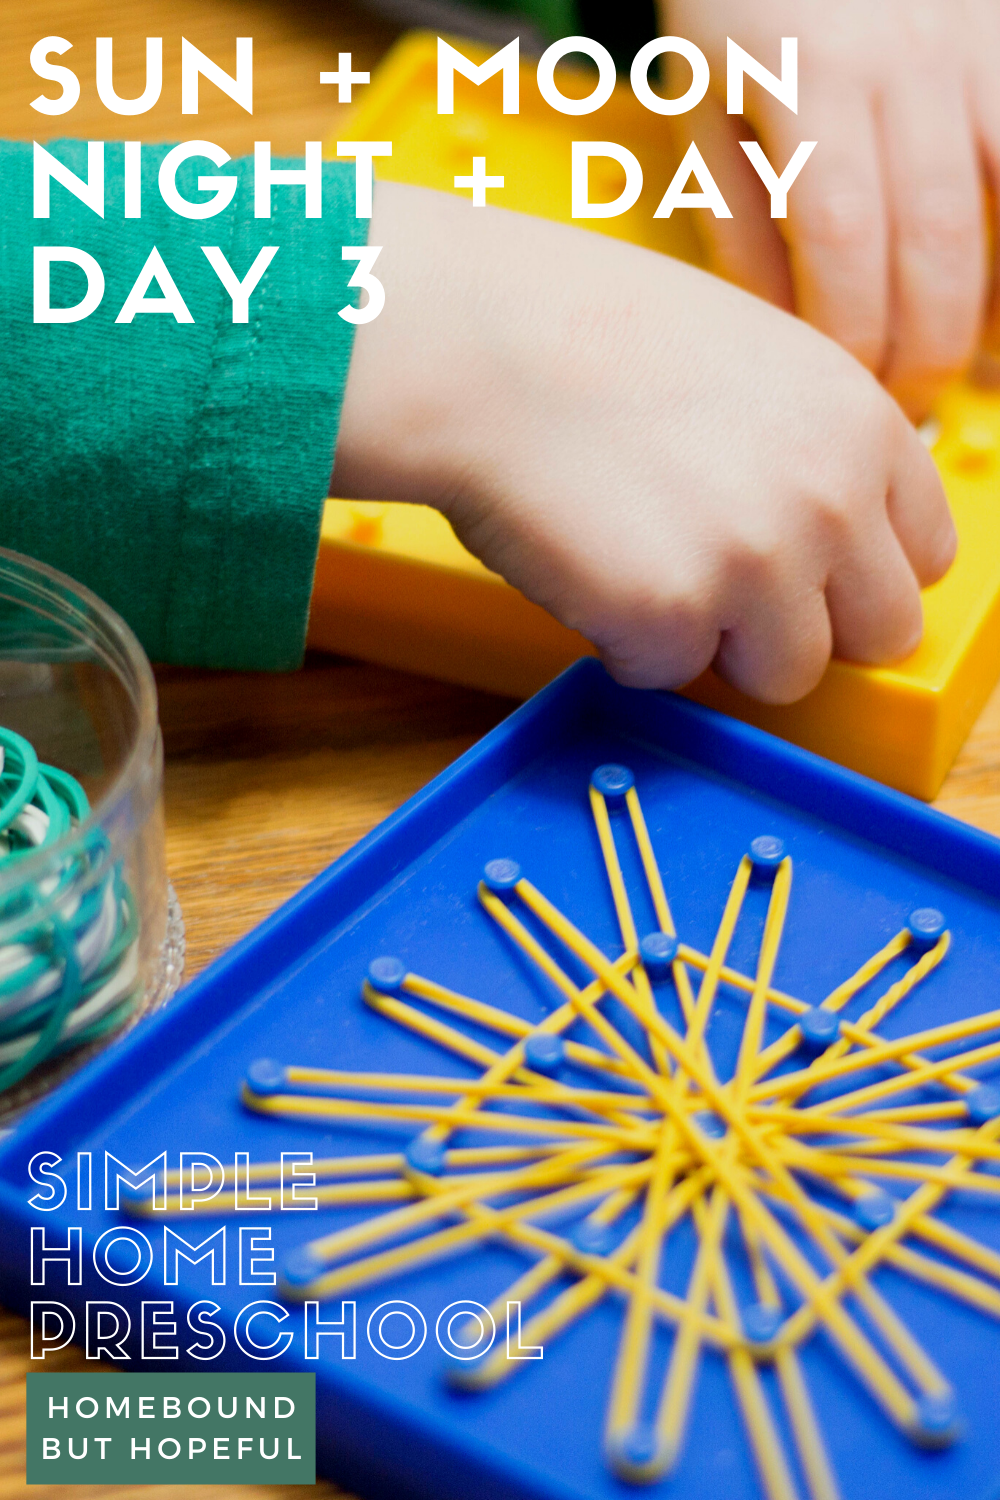 Don't miss all the hands-on fun we had learning about daytime during our home preschool! #homeschool #totschool #handsonlearning